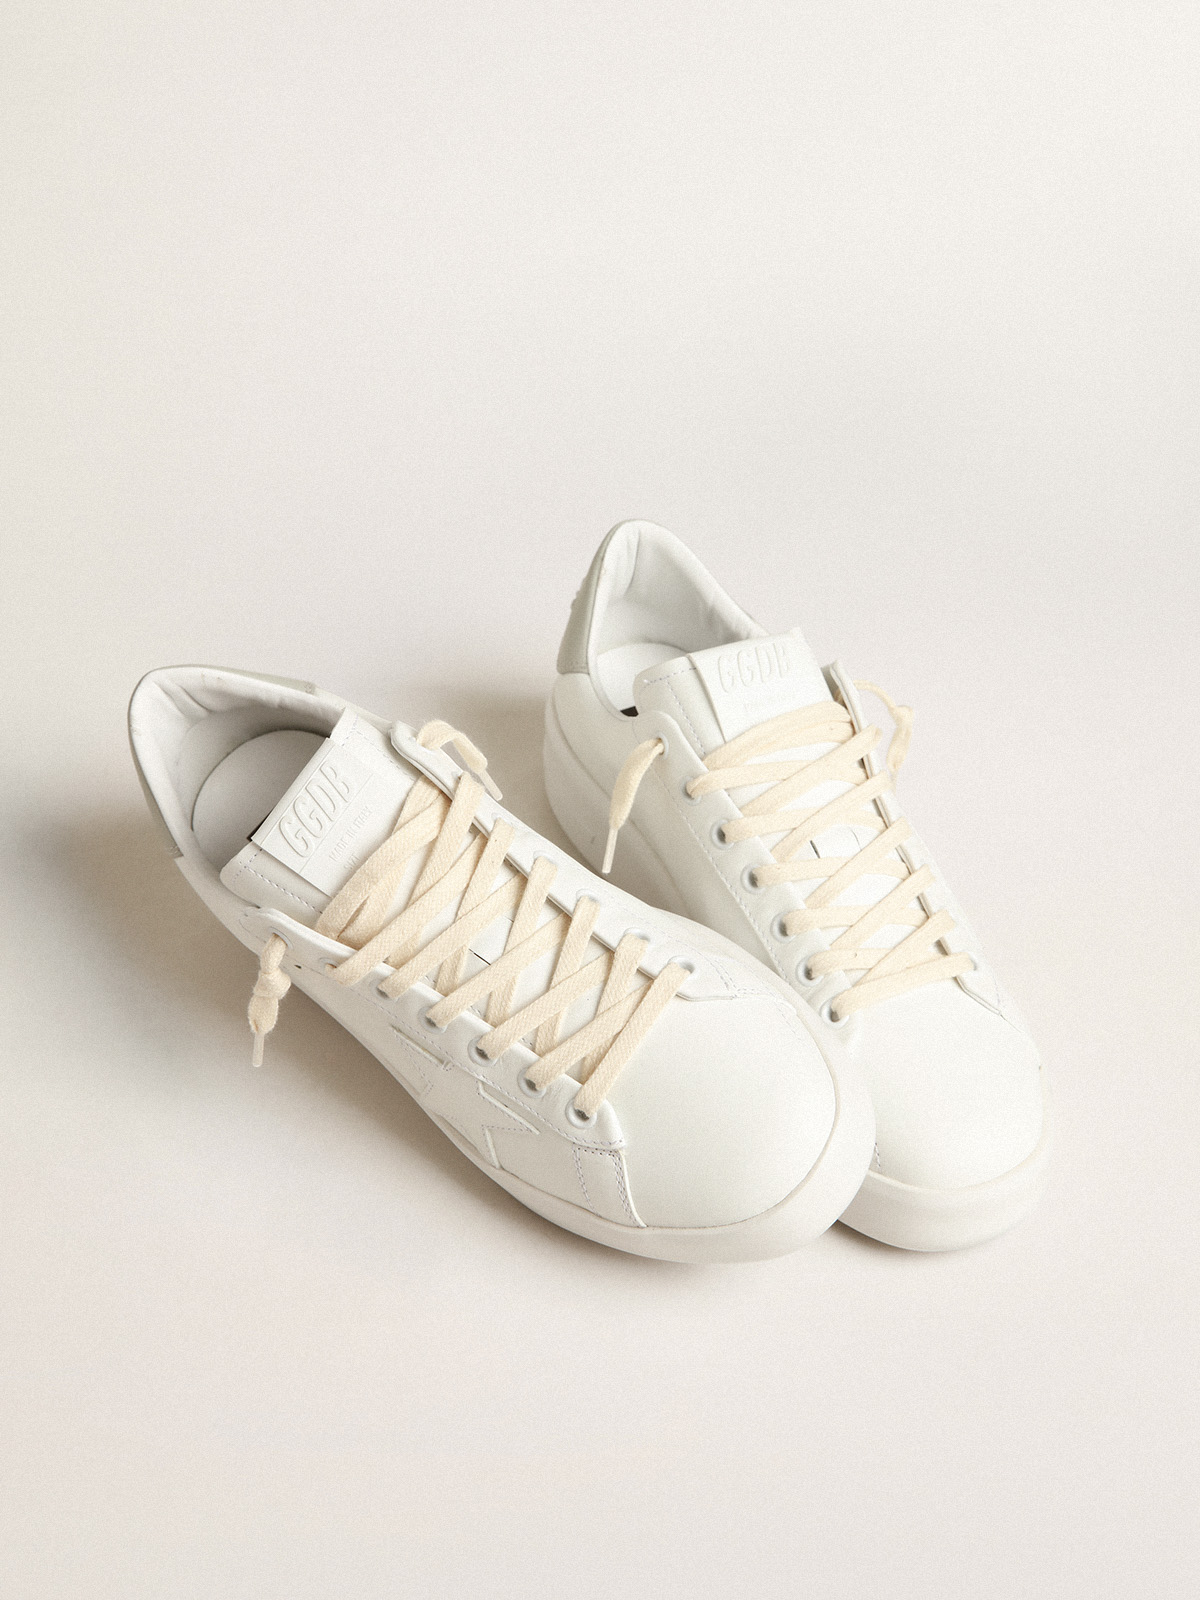 Purestar with white star and gray leather heel tab | Golden Goose